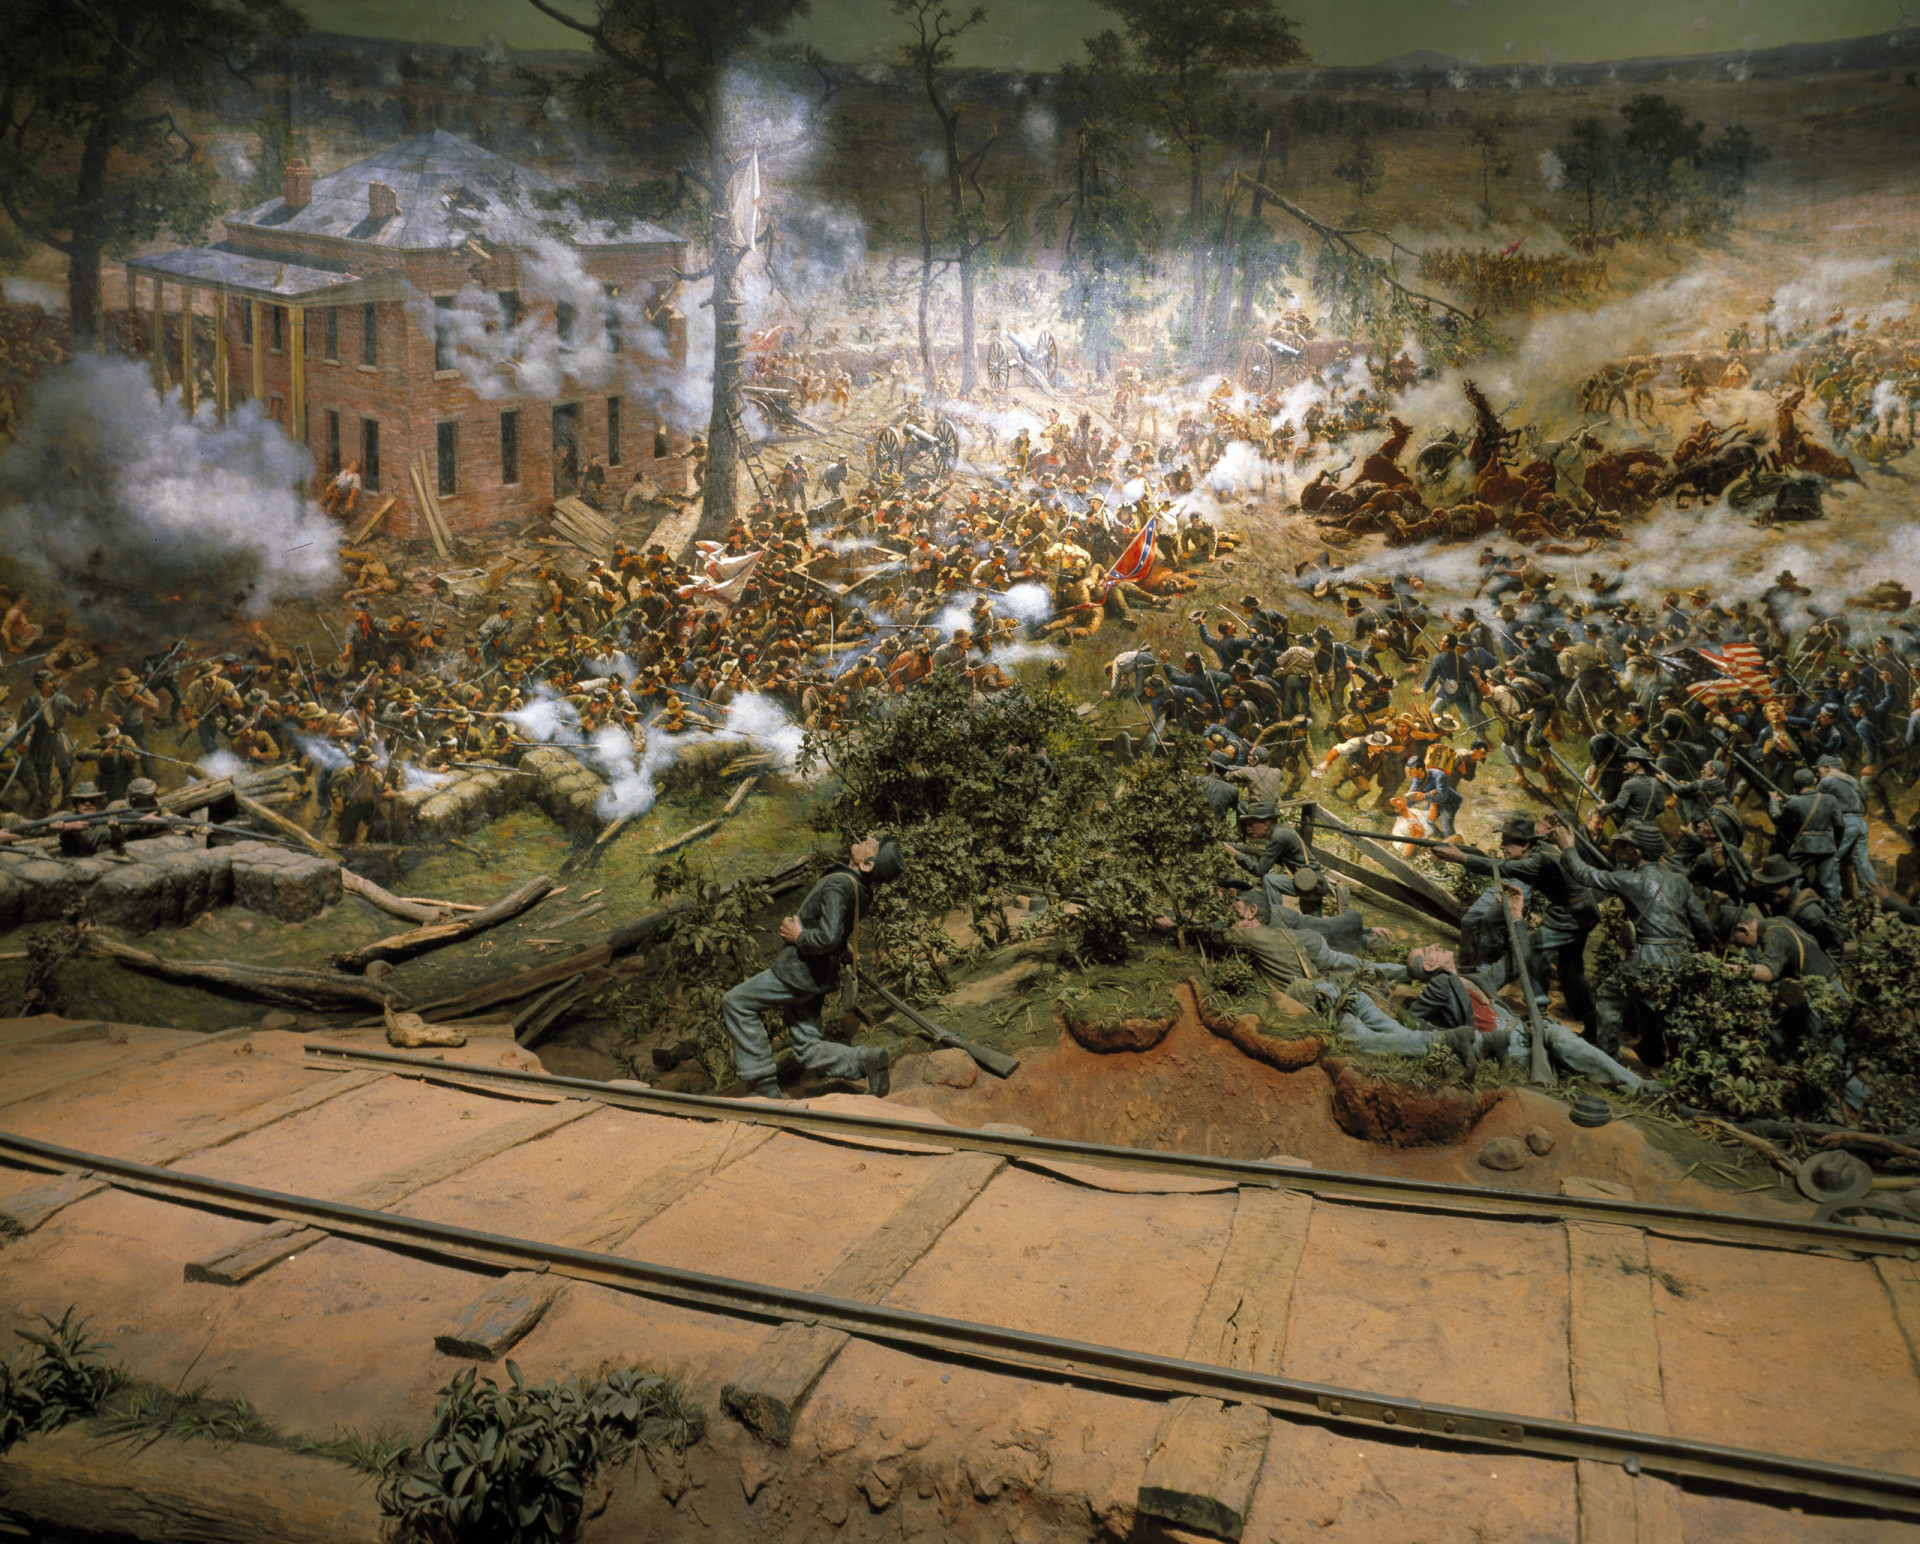 <p>The extraordinary Atlanta Cyclorama is a cylindrical panoramic painting executed in minute and graphic detail depicting the bloody Civil War Battle of Atlanta. It's found at the Atlanta History Center.</p><p><a href="https://www.msn.com/en-us/community/channel/vid-7xx8mnucu55yw63we9va2gwr7uihbxwc68fxqp25x6tg4ftibpra?cvid=94631541bc0f4f89bfd59158d696ad7e">Follow us and access great exclusive content every day</a></p>